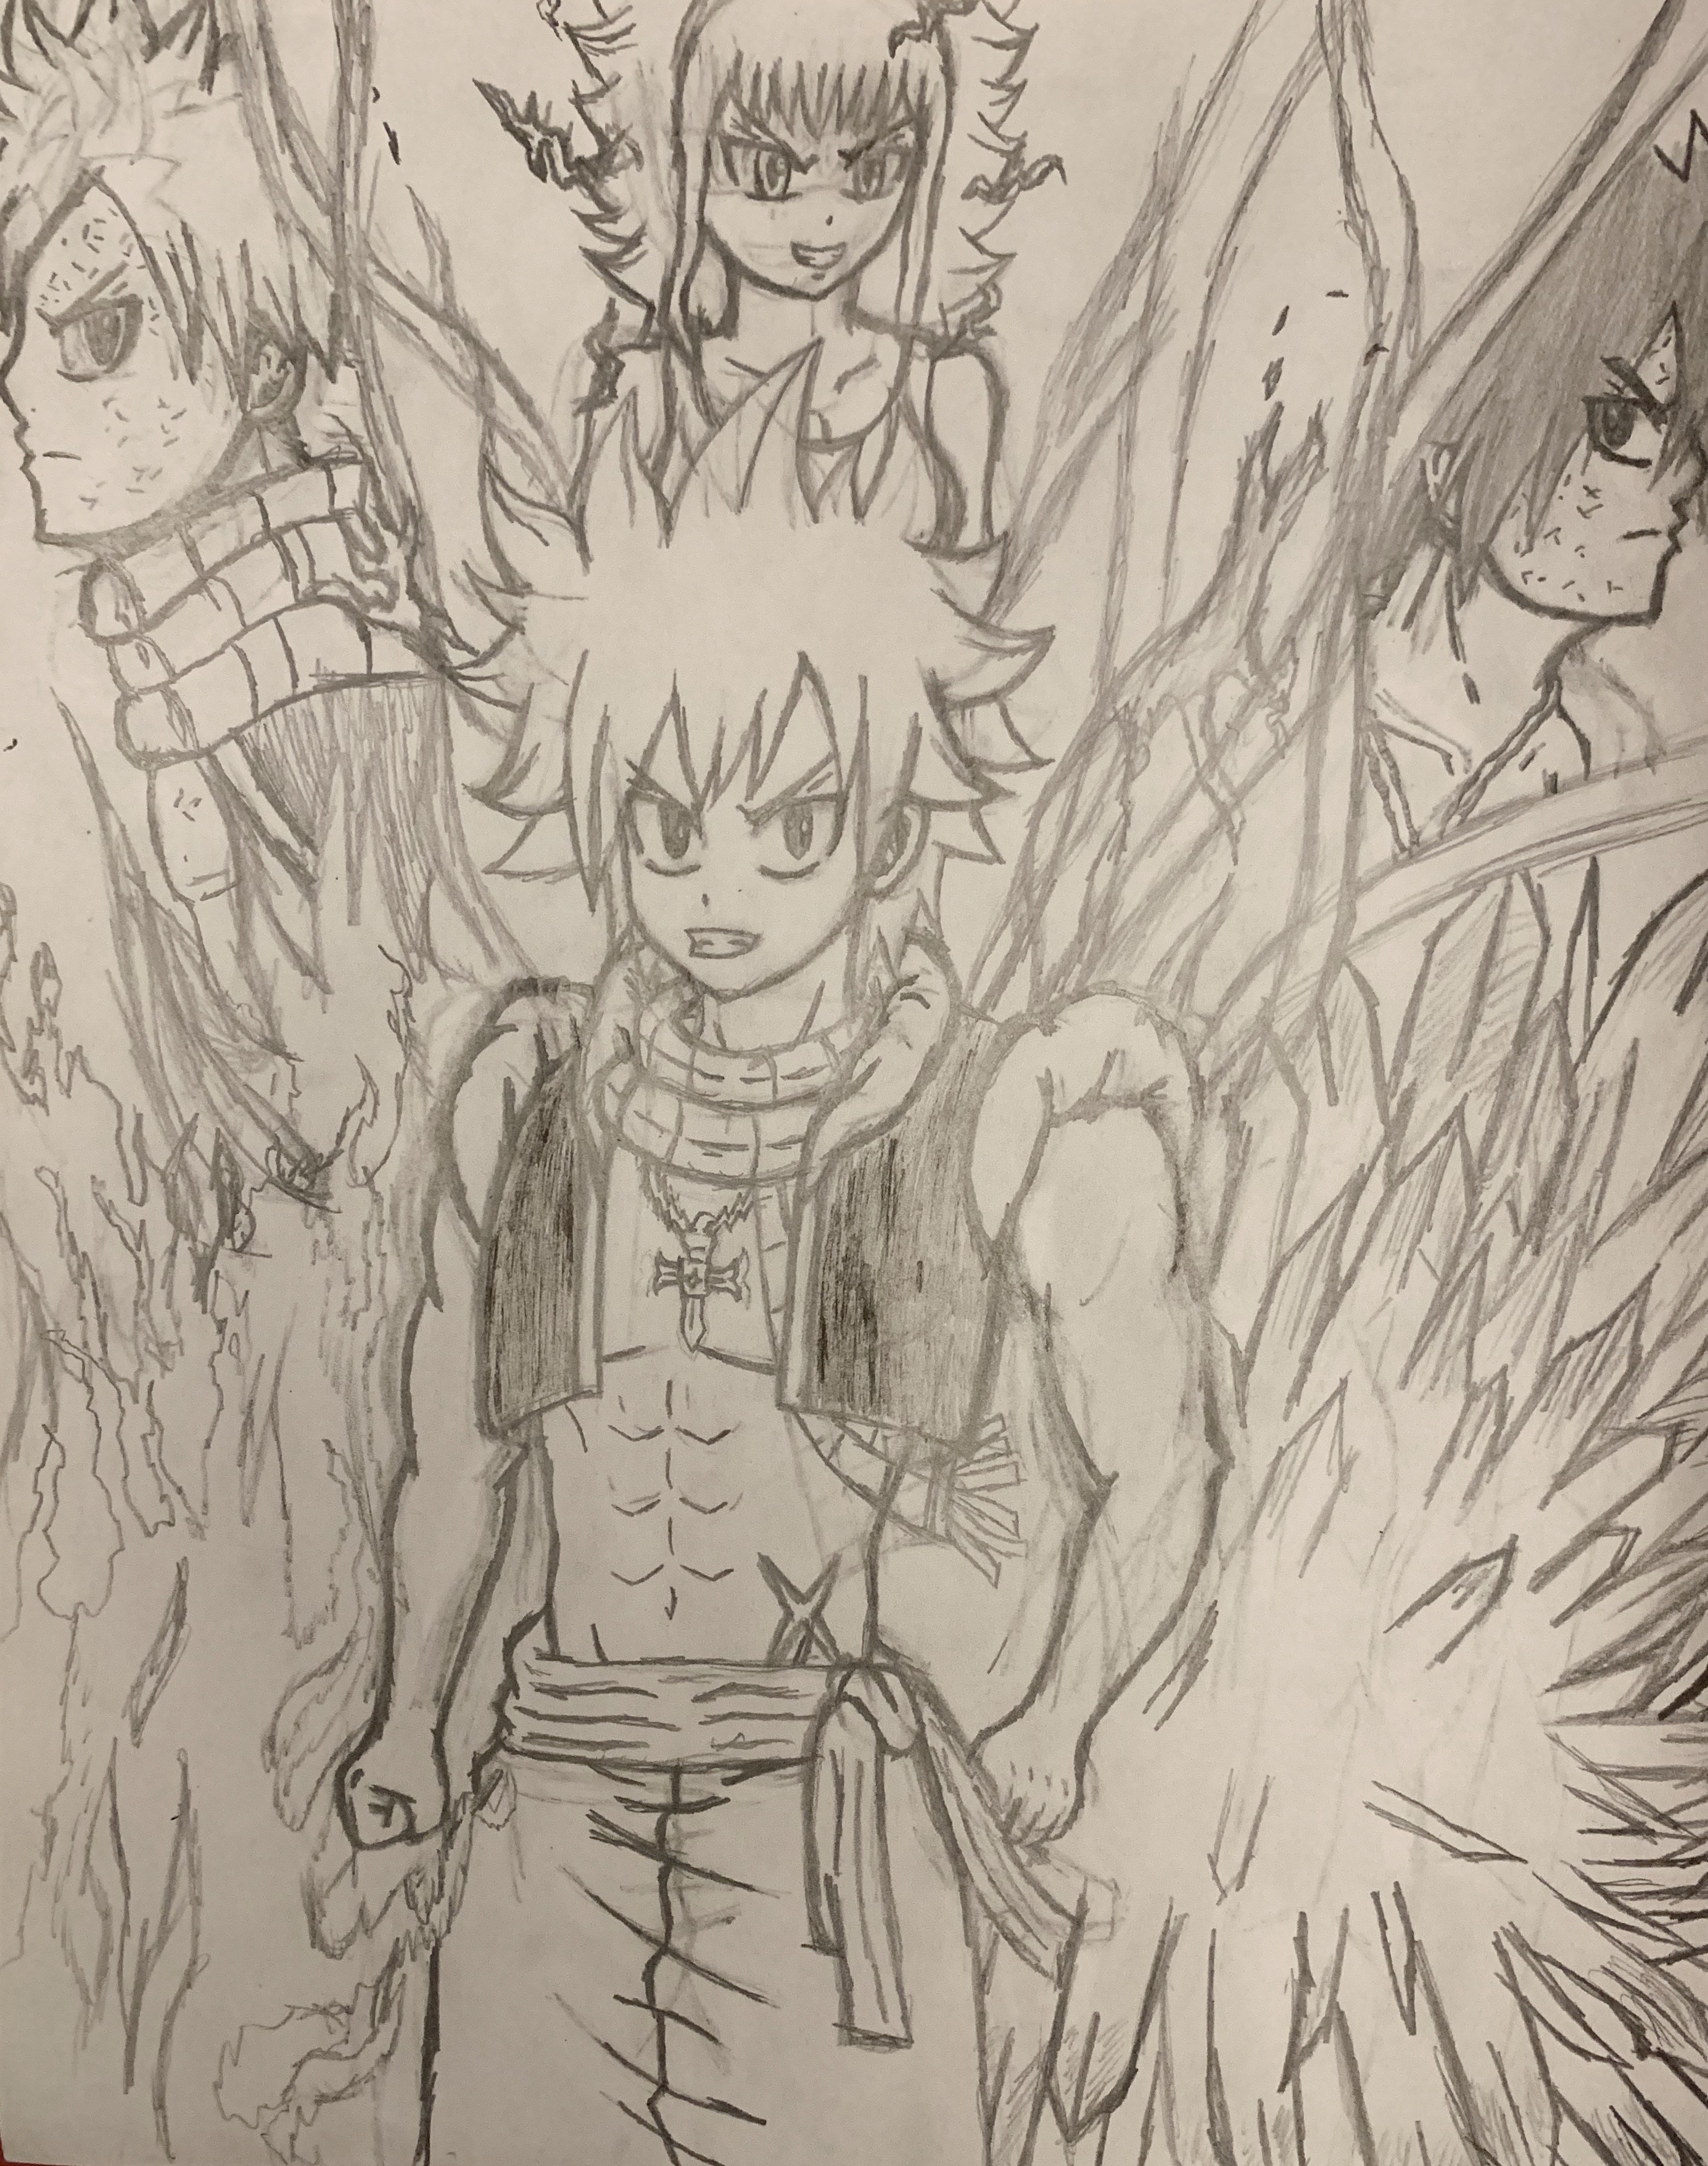 natsu dragneel dragon form by Squid-with-pen on DeviantArt